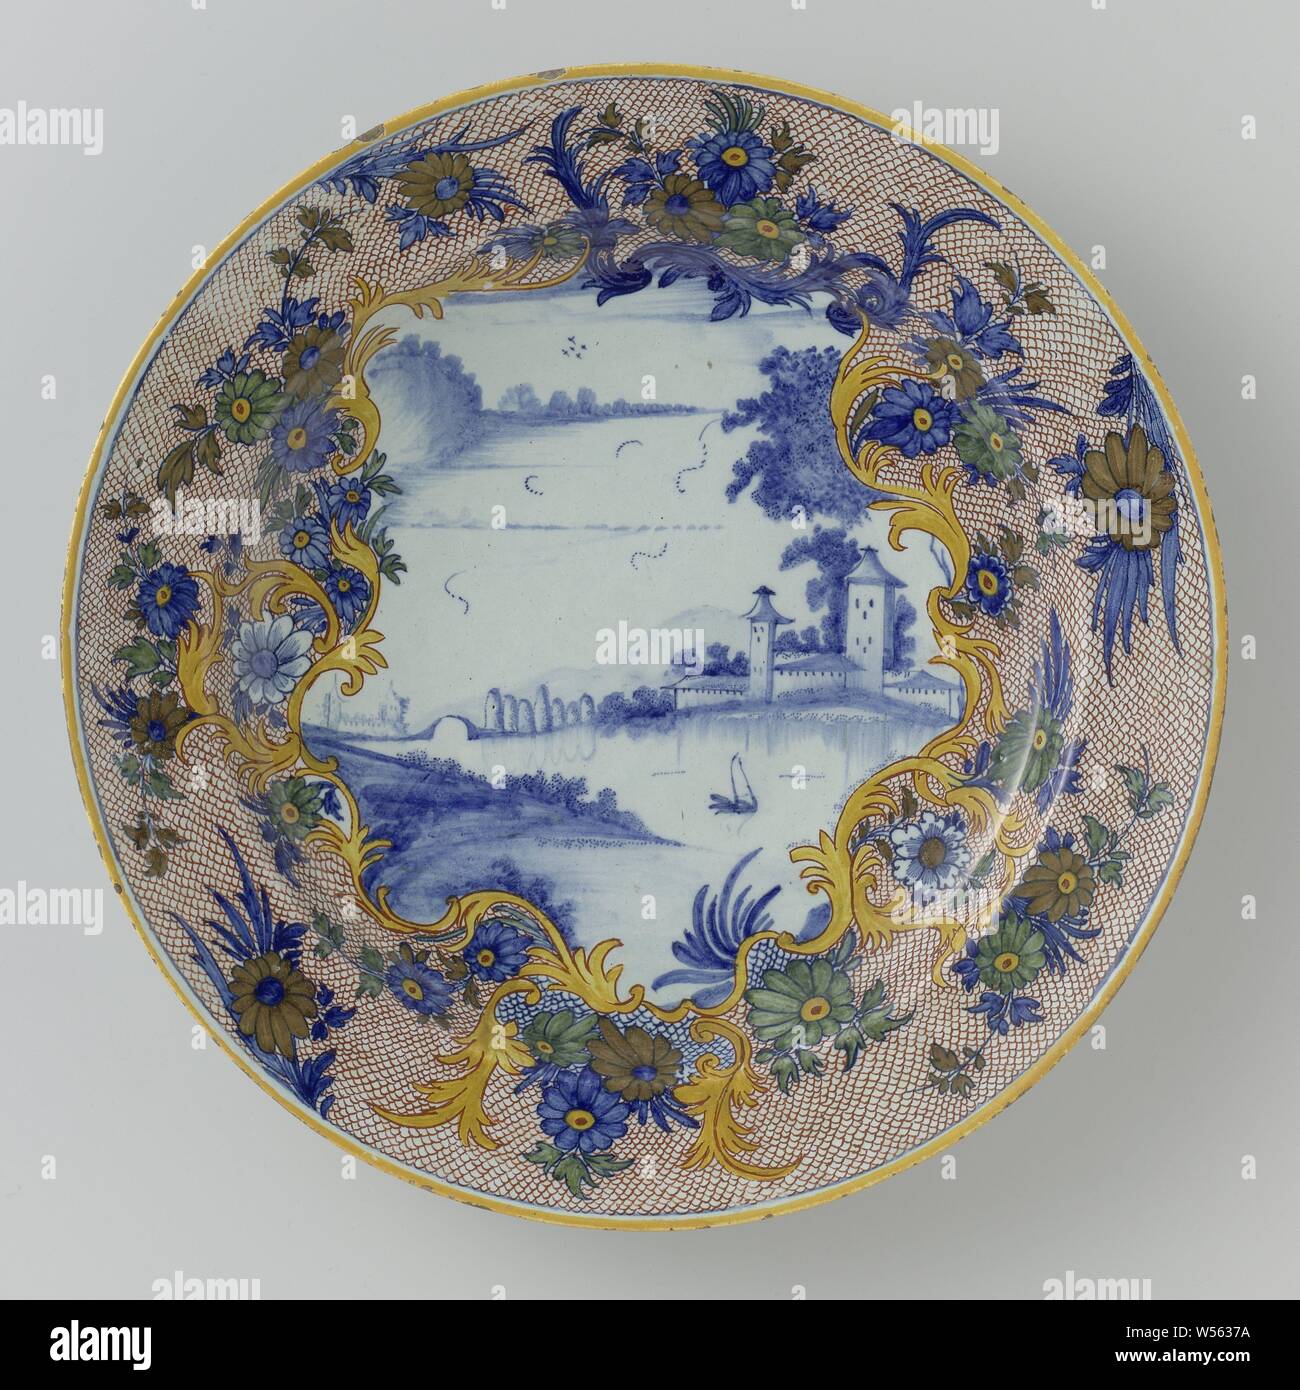 Dish painted with a river landscape, Dish of faience. On the shelf a landscape in blue. Around it a multicolored flower border., anonymous, Delft, c. 1750 - c. 1775, d 35.2 cm × h 4.8 cm Stock Photo